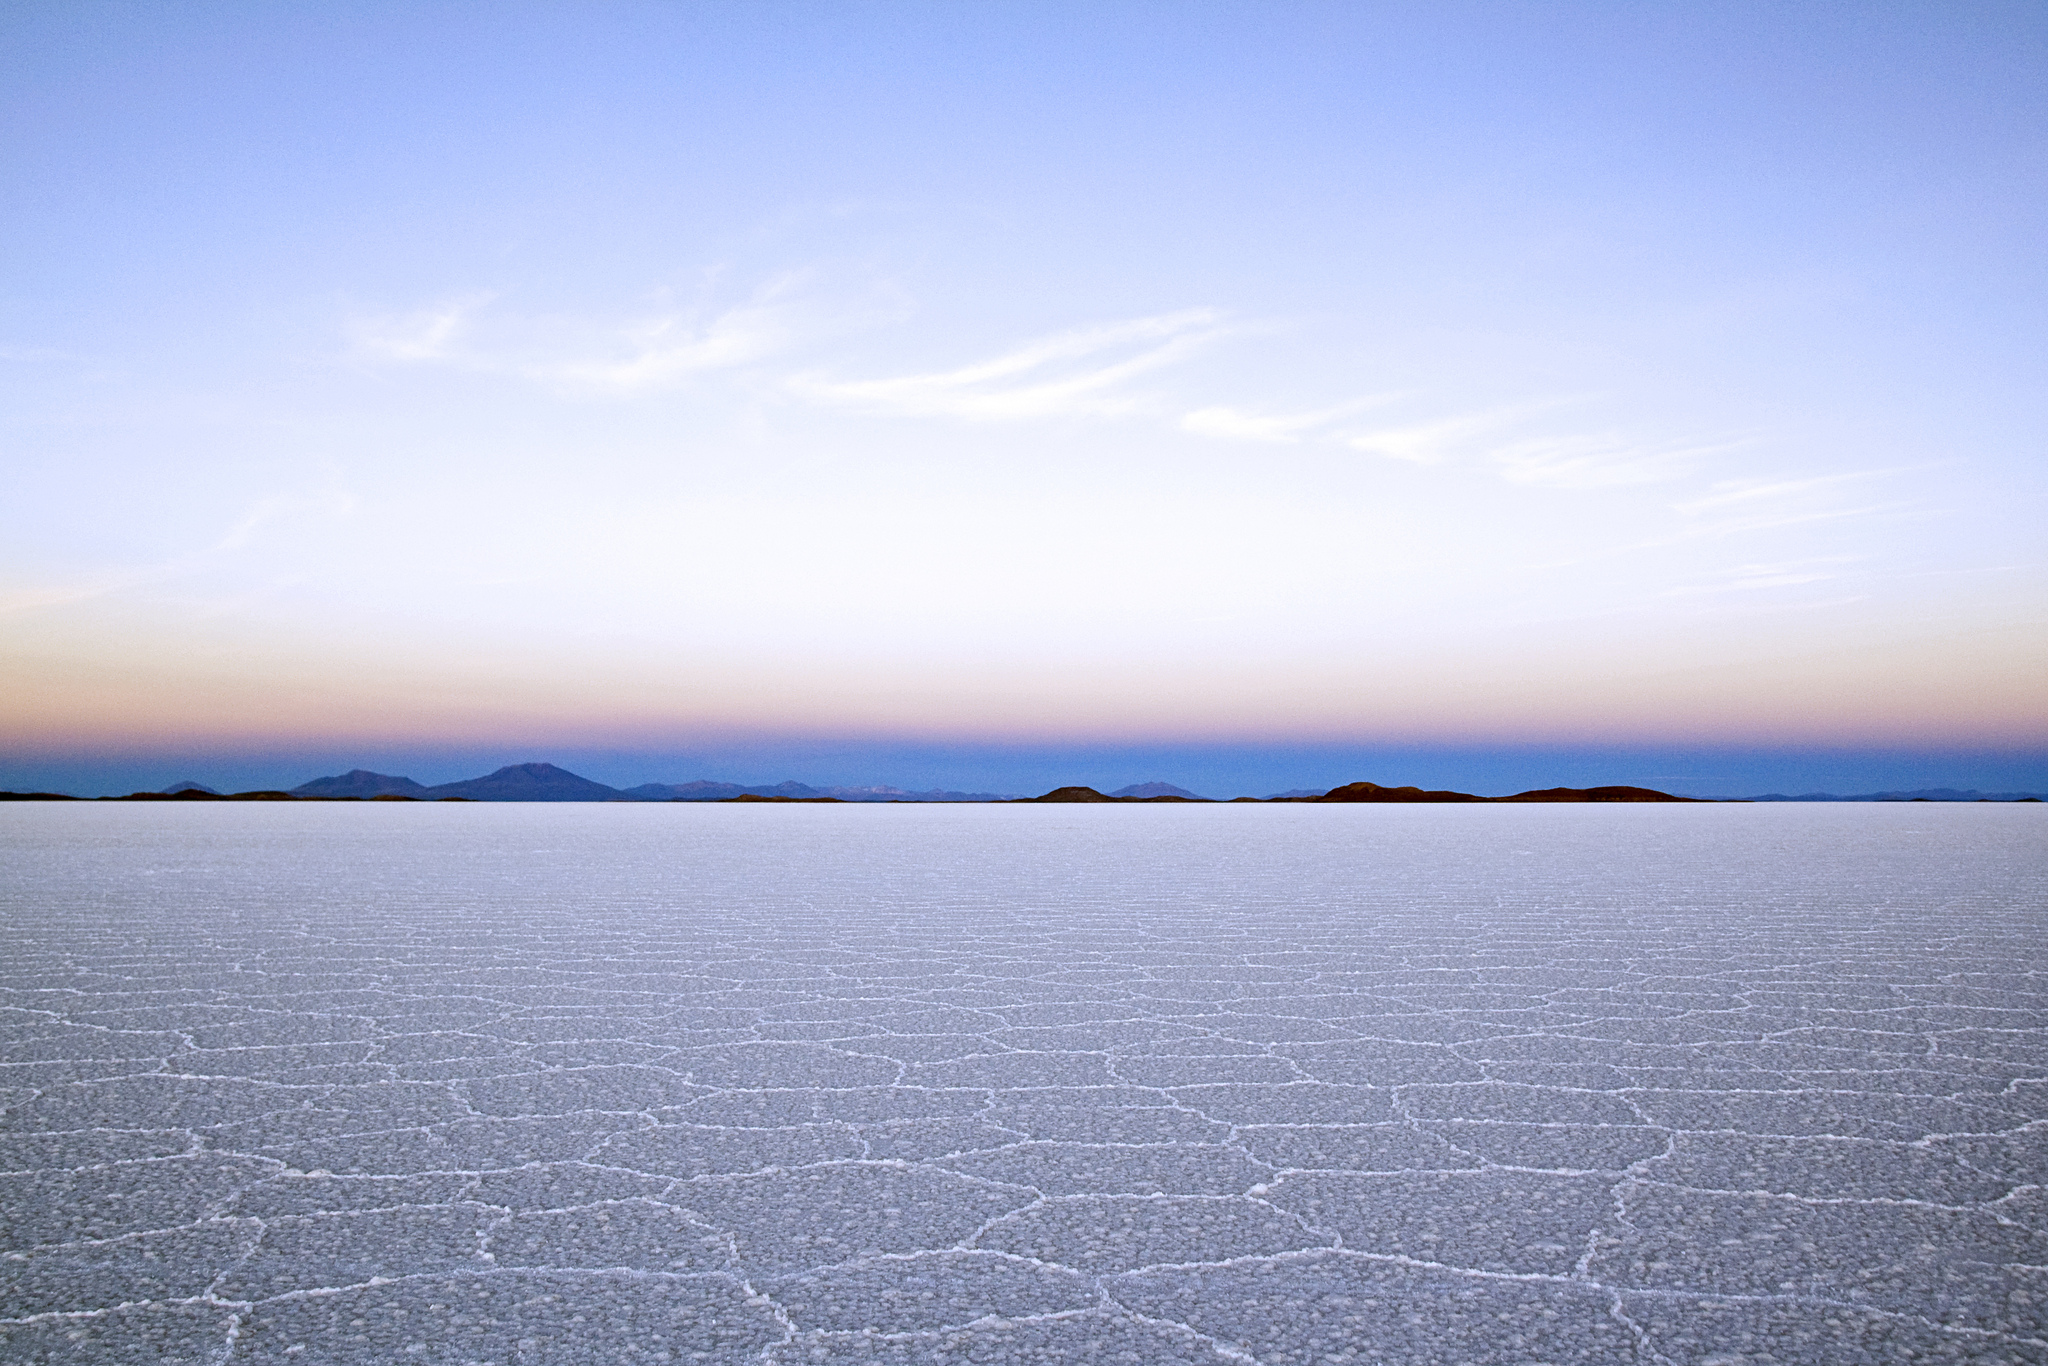 bolivia-s-salt-flats-are-the-closest-you-ll-get-to-heaven-on-earth